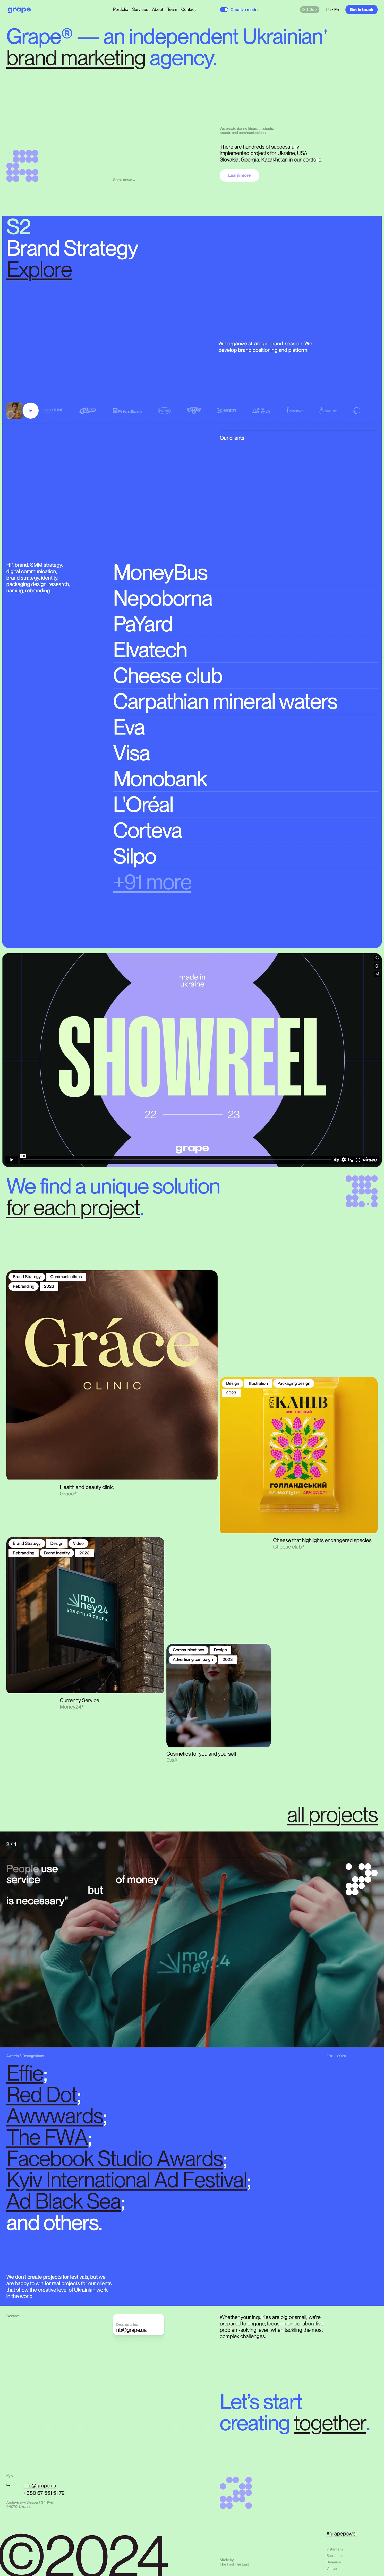 Grape Landing Page Example: An independent Ukrainian brand marketing agency. We create daring ideas, products, brands and communications.